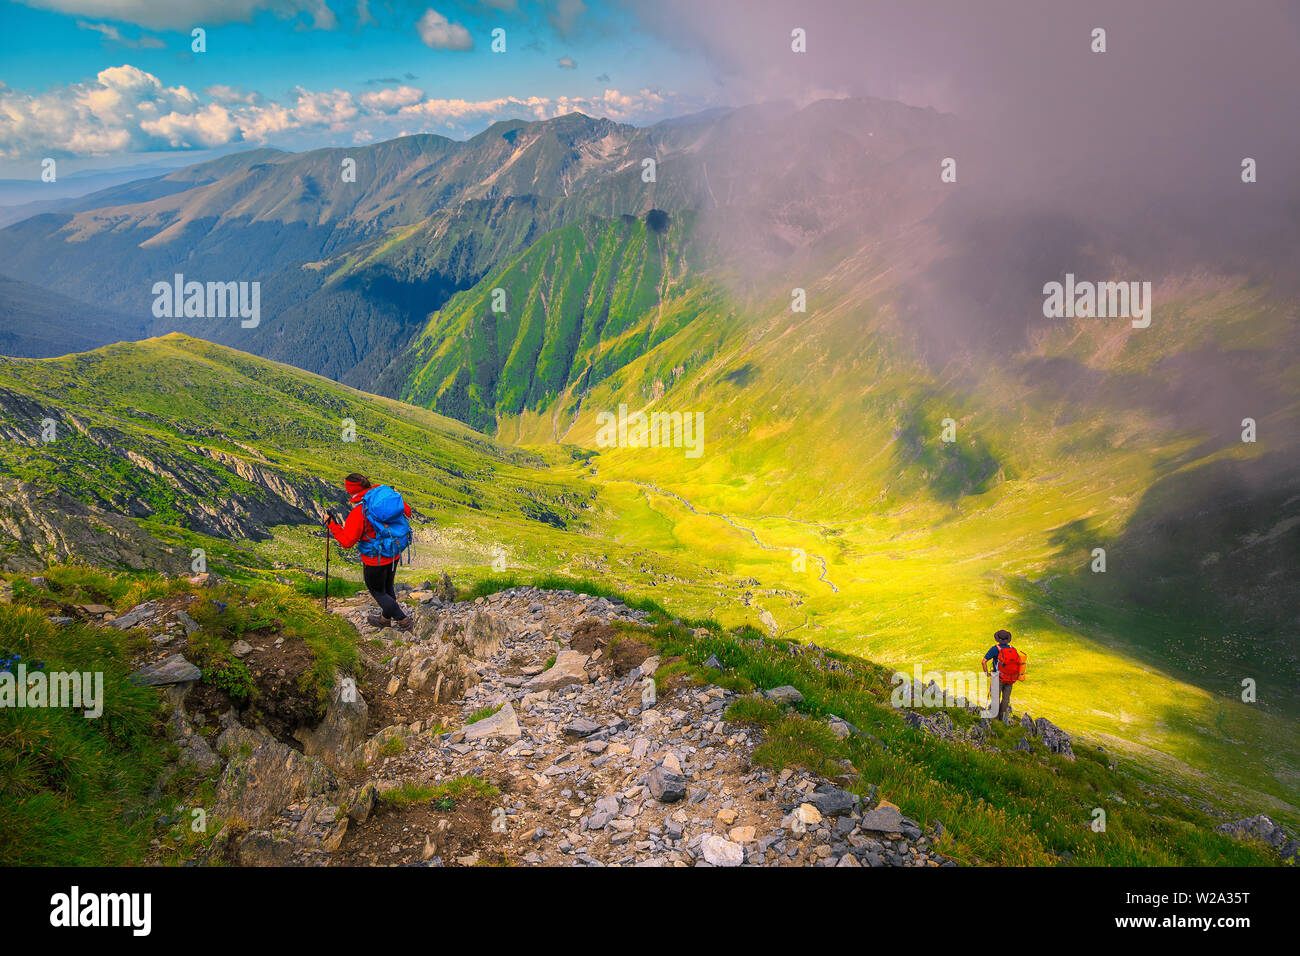 Sporty active backpacker hikers group on the misty mountain hiking trails, Fagaras mountains, Carpathians, Romania, Europe Stock Photo